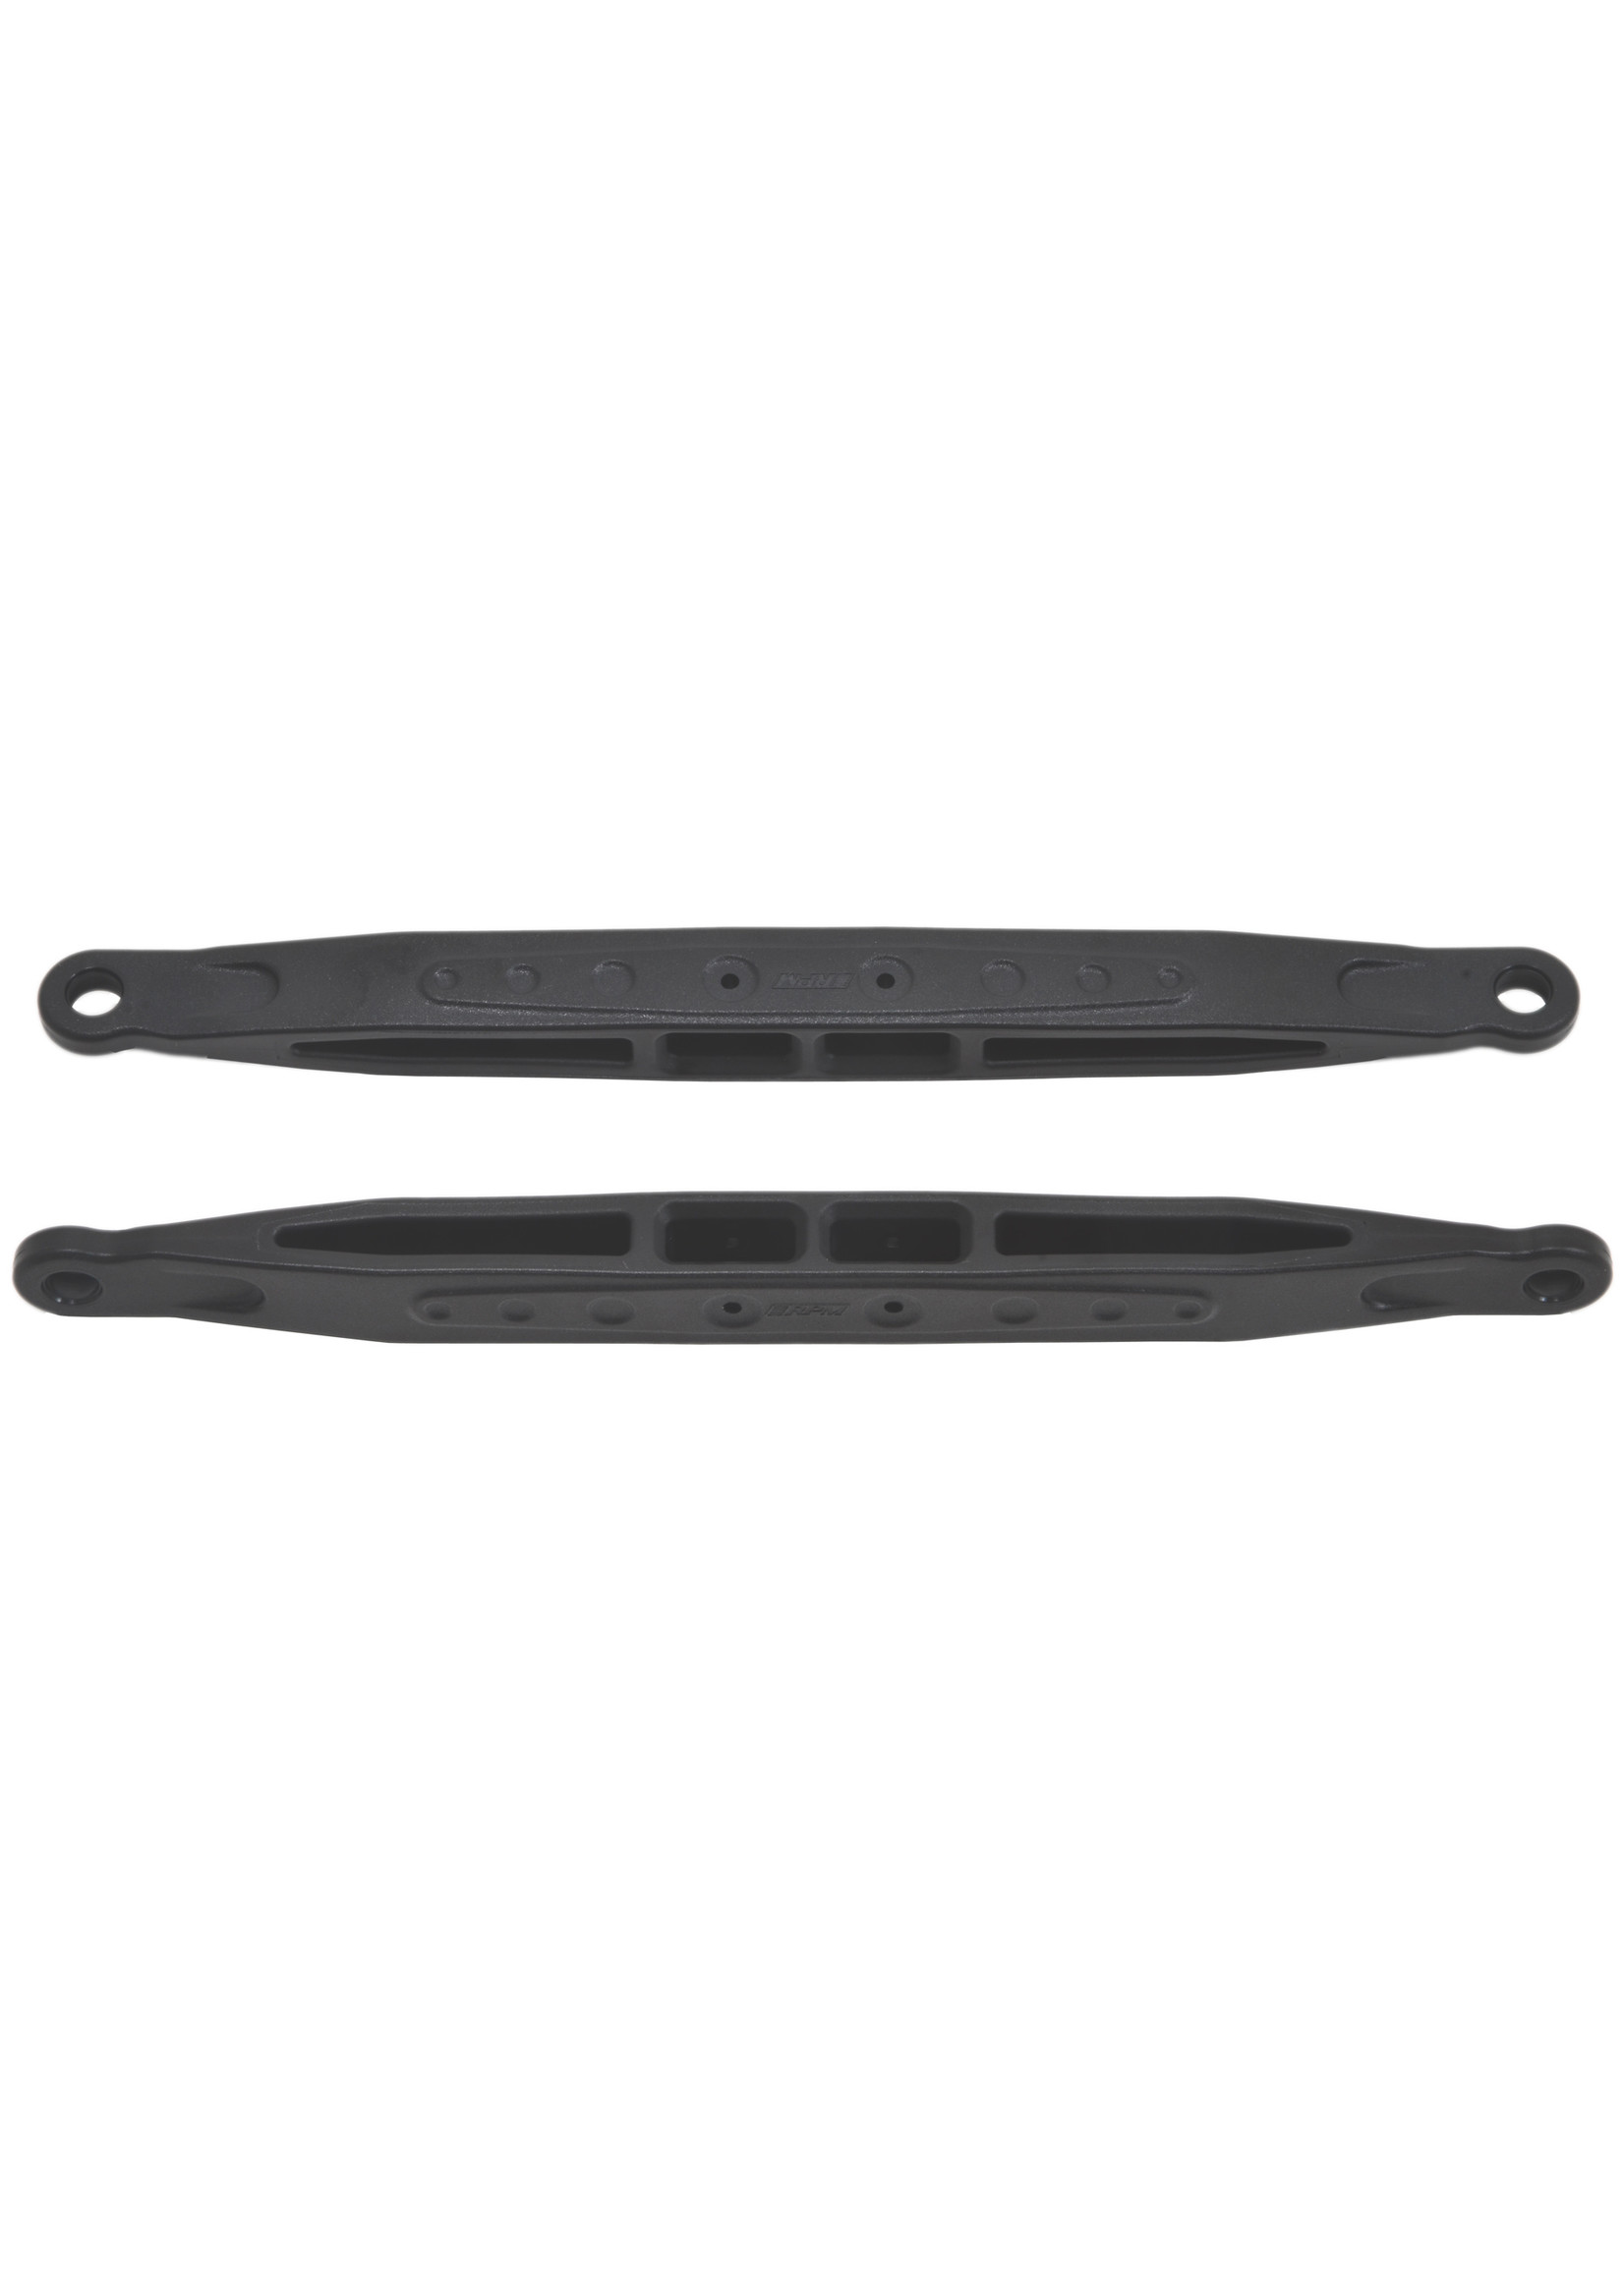 RPM 81282 - Trailing Arms for Traxxas Unlimited Desert Racer - Black